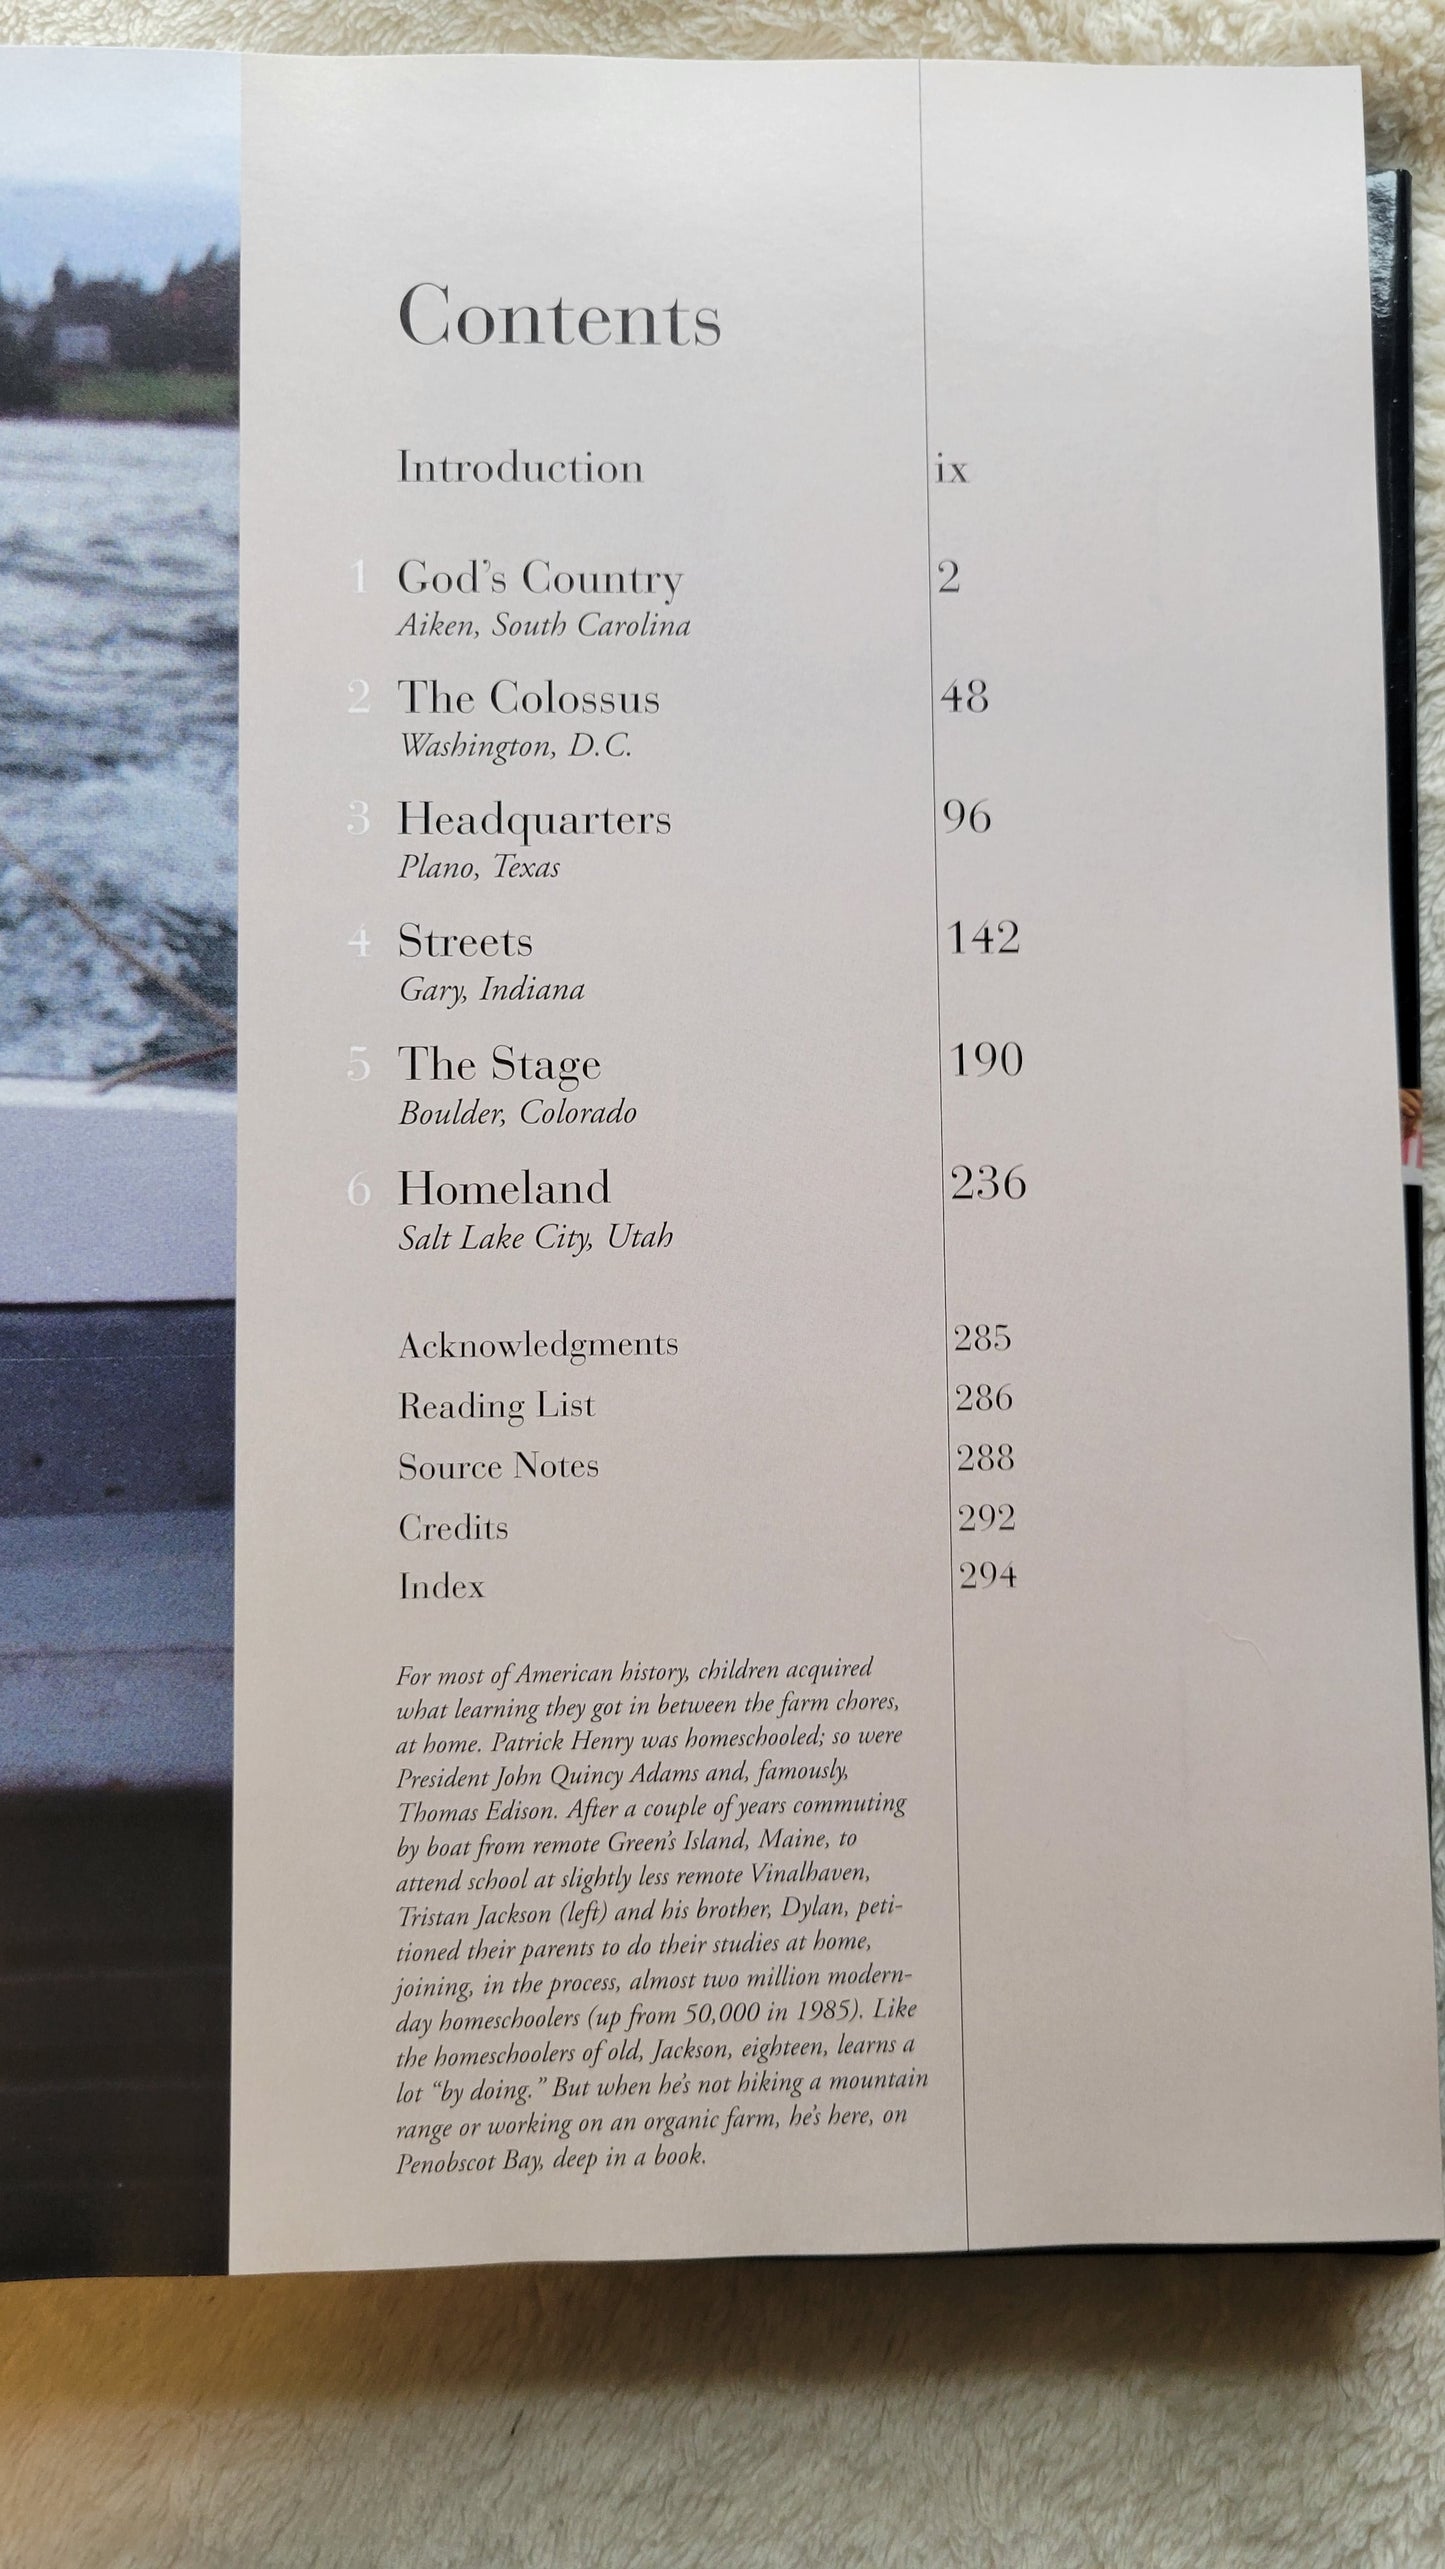 Used book for sale "In Search of America" by Peter Jennings and Todd Brewster, published by Hyperion, 2002, first edition. View of table of contents.